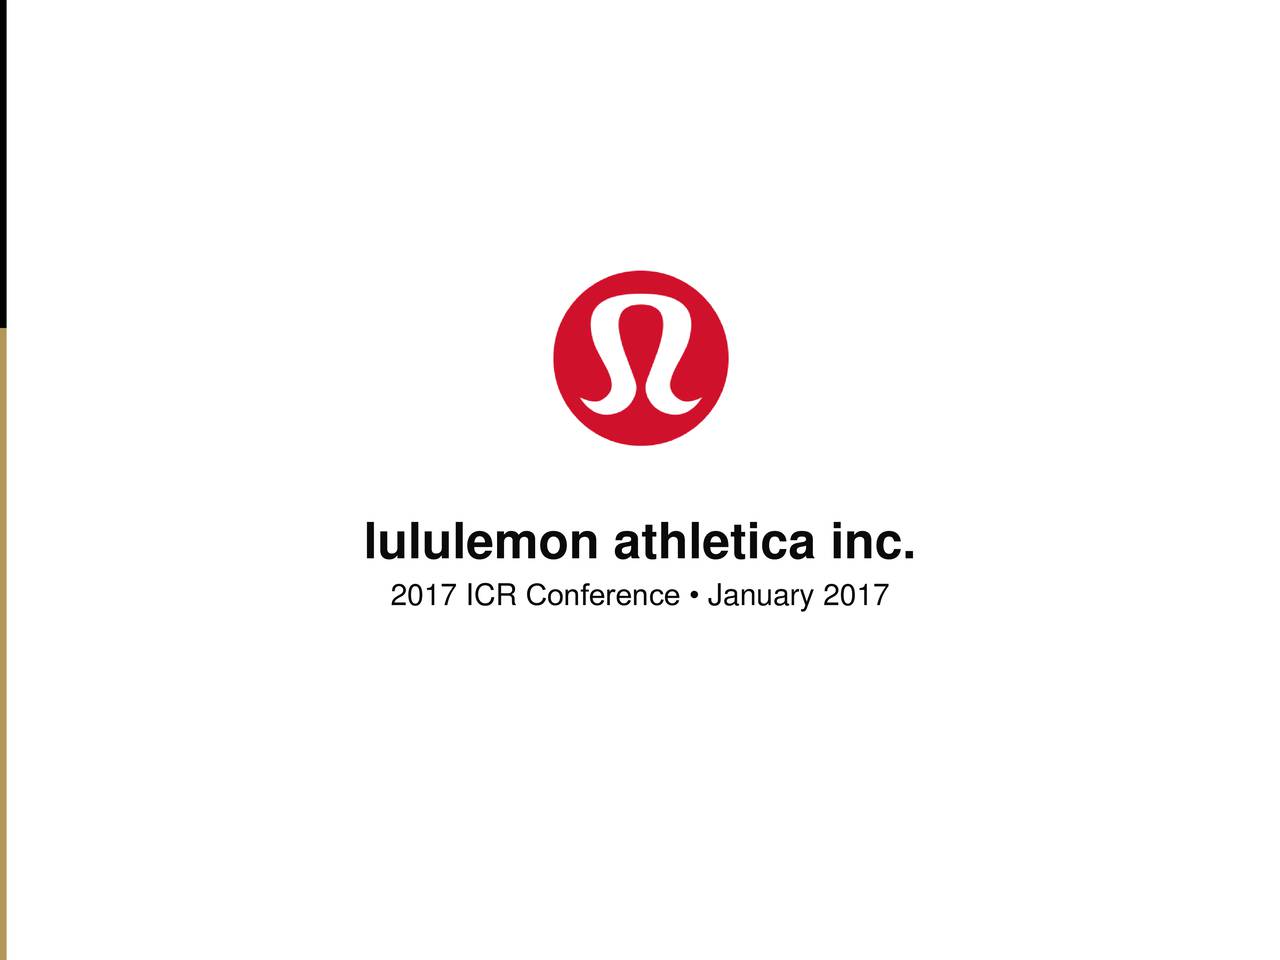 Lululemon withholds guidance for 2020 due to COVID-19 as Q4 profits rise